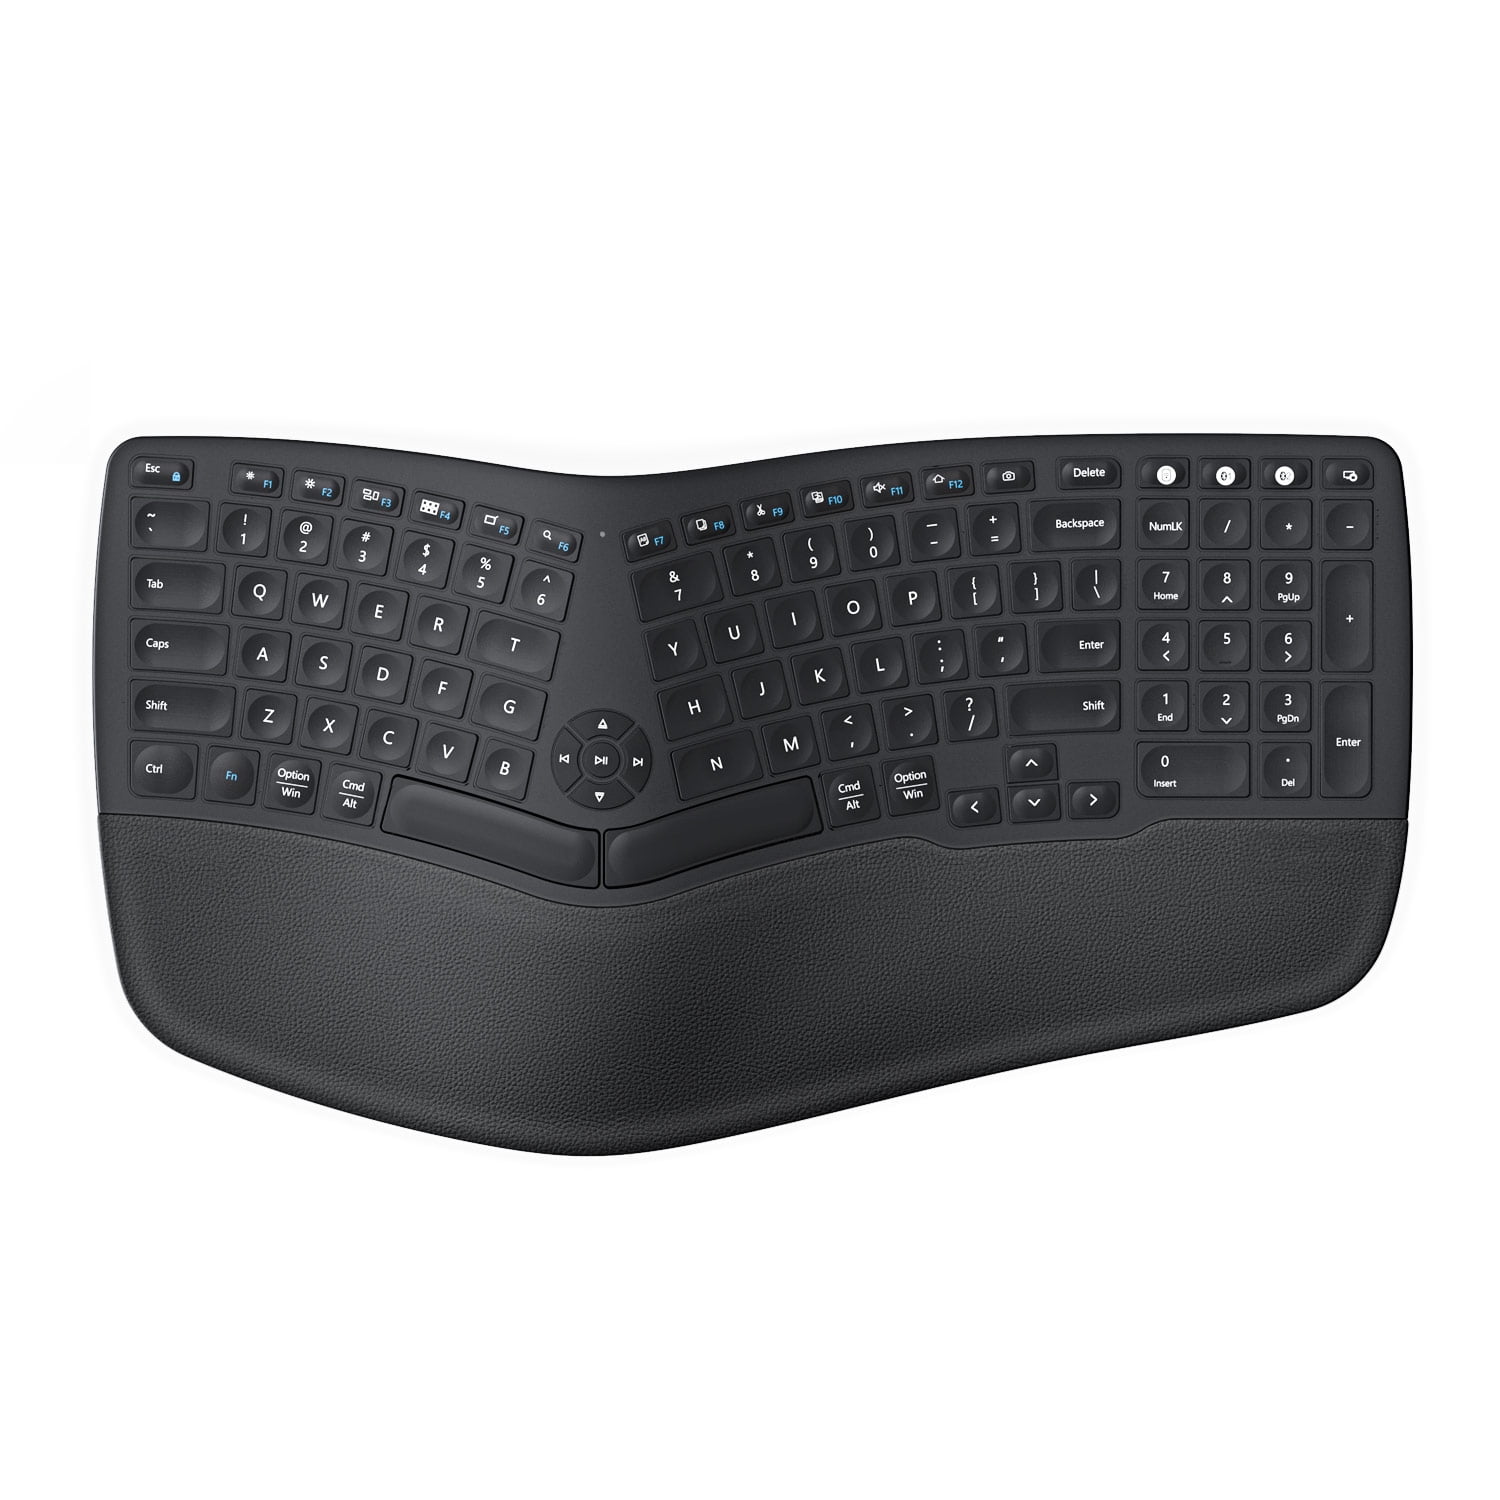 Rechargeable Wireless Ergonomic Split Keyboard with Synthetic Leather Wrist Rest and Foldable Stands for Windows/Mac OS/Android Jelly Comb KE68 Multi-Device Ergonomic Keyboard, 2.4G+BT1+BT2 